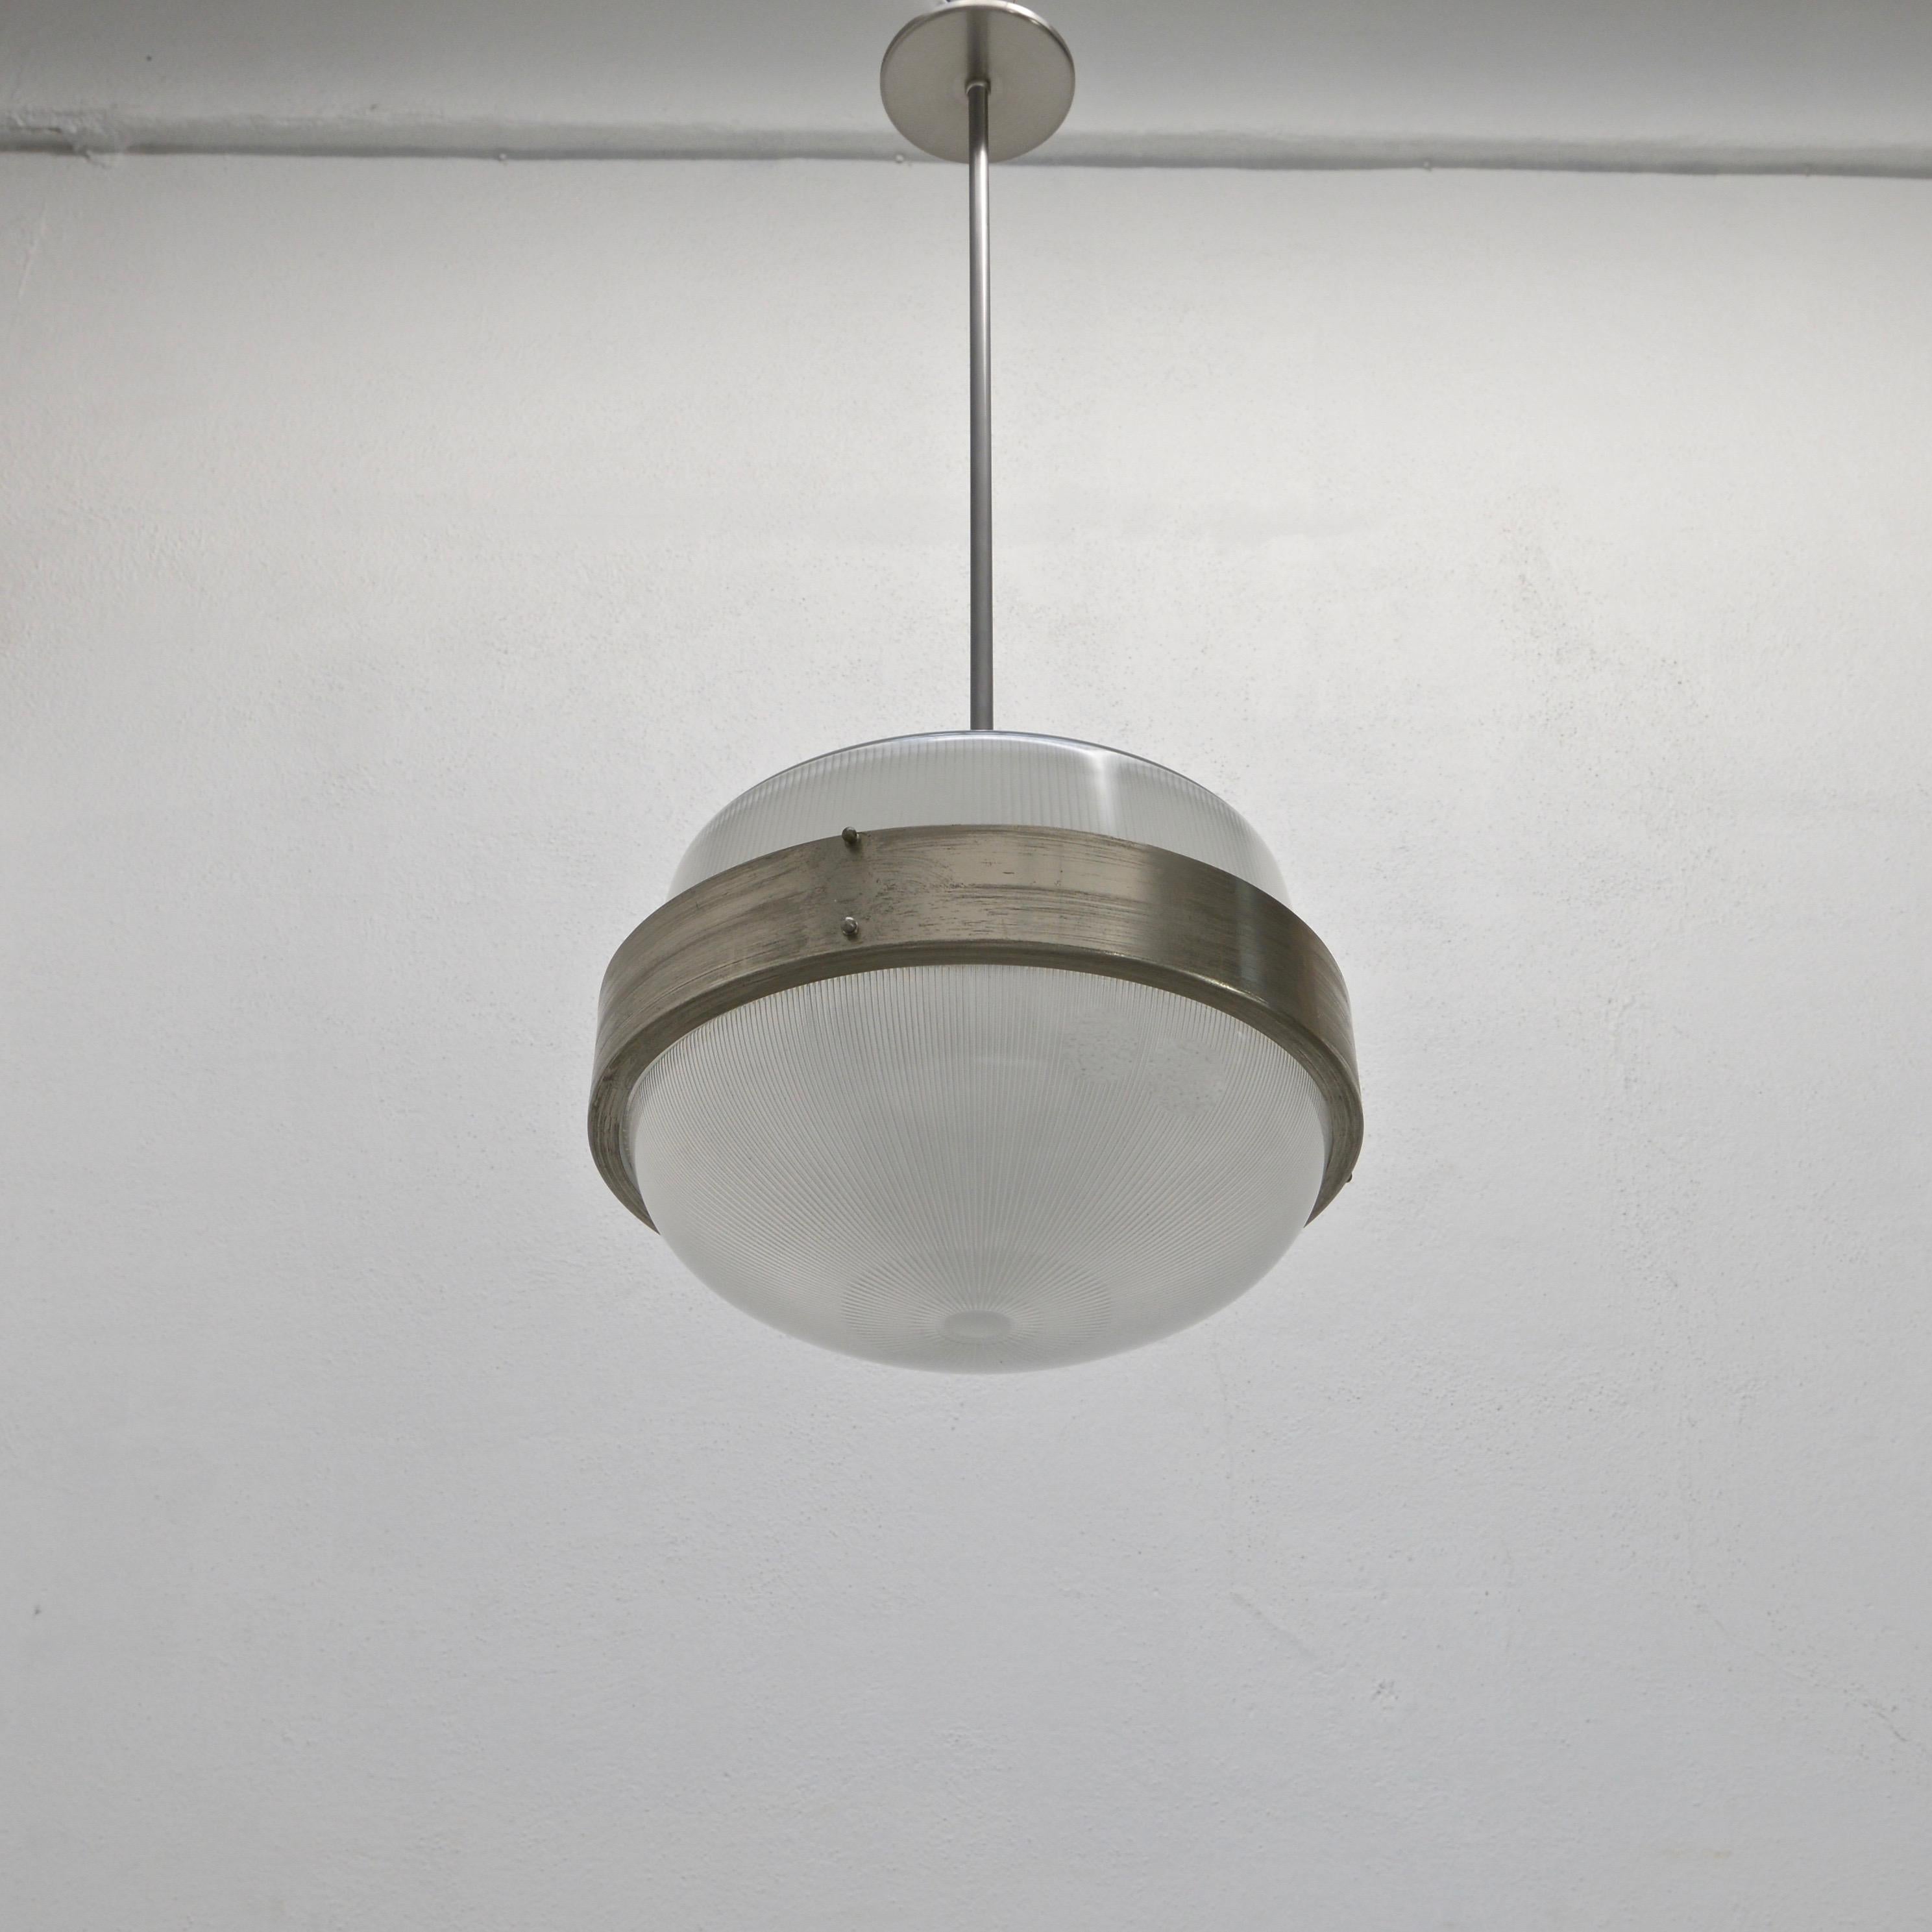 Classic Sergio Mazza pendant from 1960s Italy in Holophane glass and aged nickel. Wired with E26 medium based sockets and wired for use in the US. Light bulbs included with order.
Measurements:
OAD: 35” can be adjusted upon request
Diameter